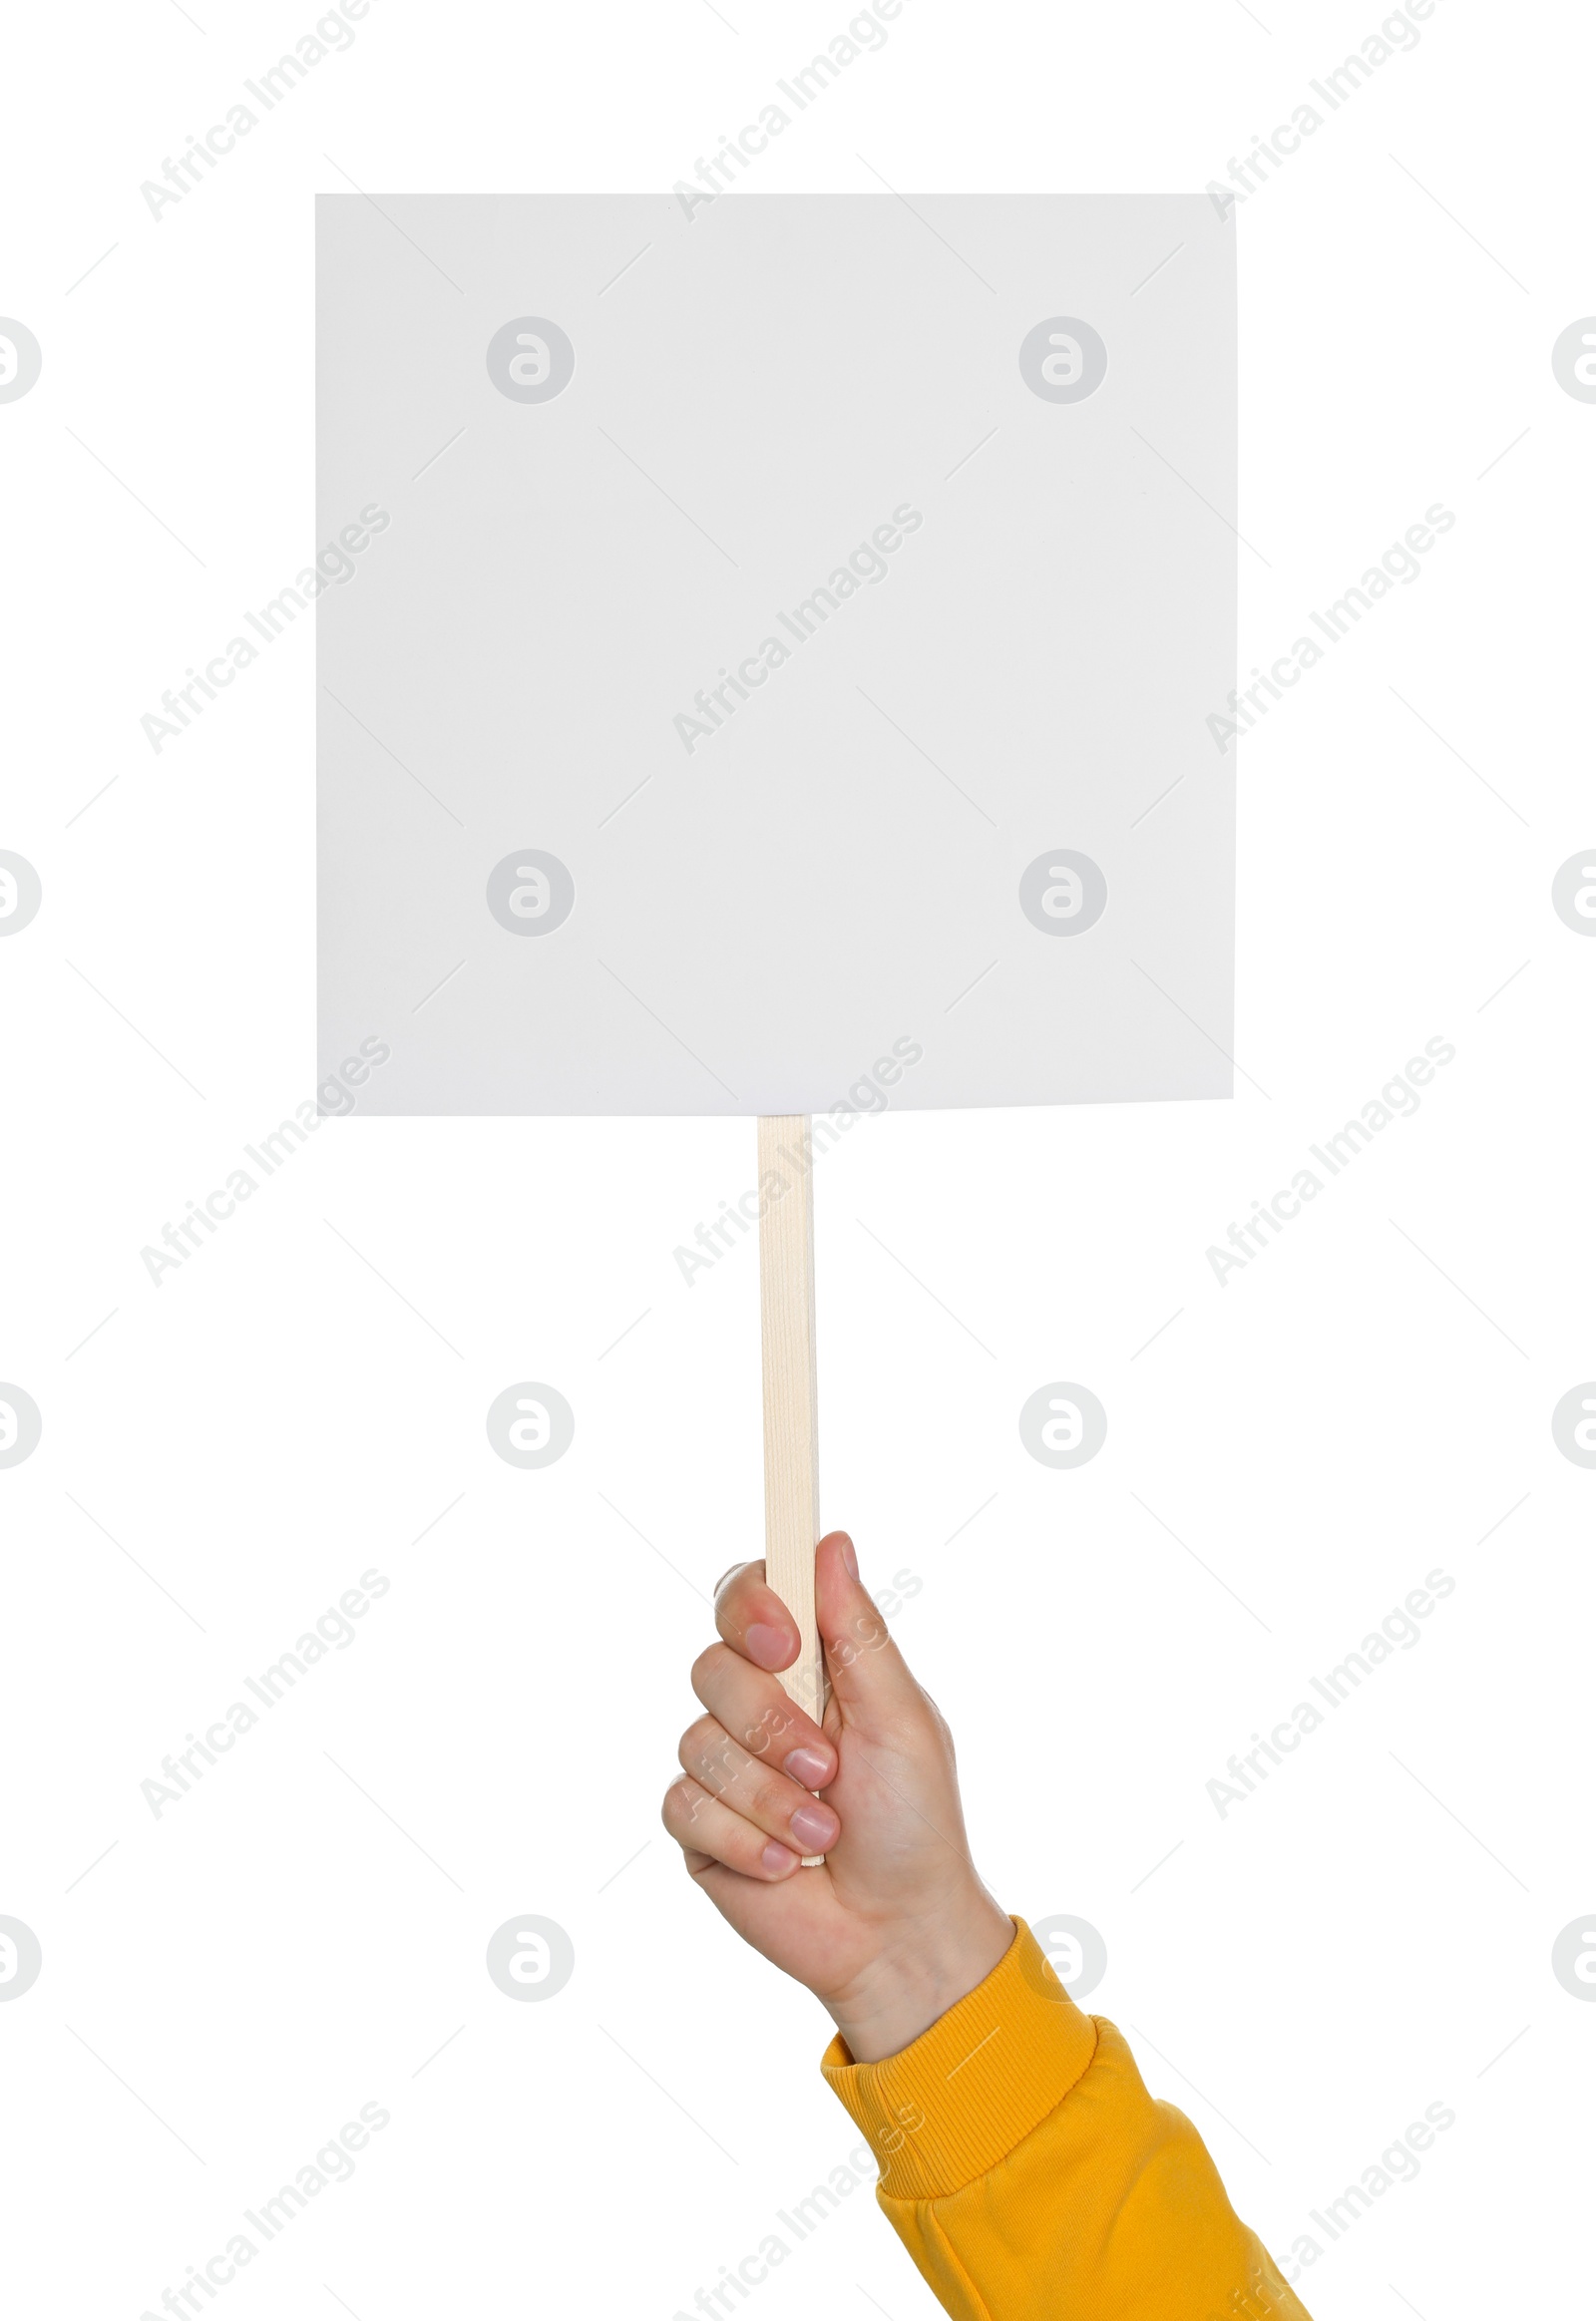 Photo of Man holding blank protest sign on white background, closeup